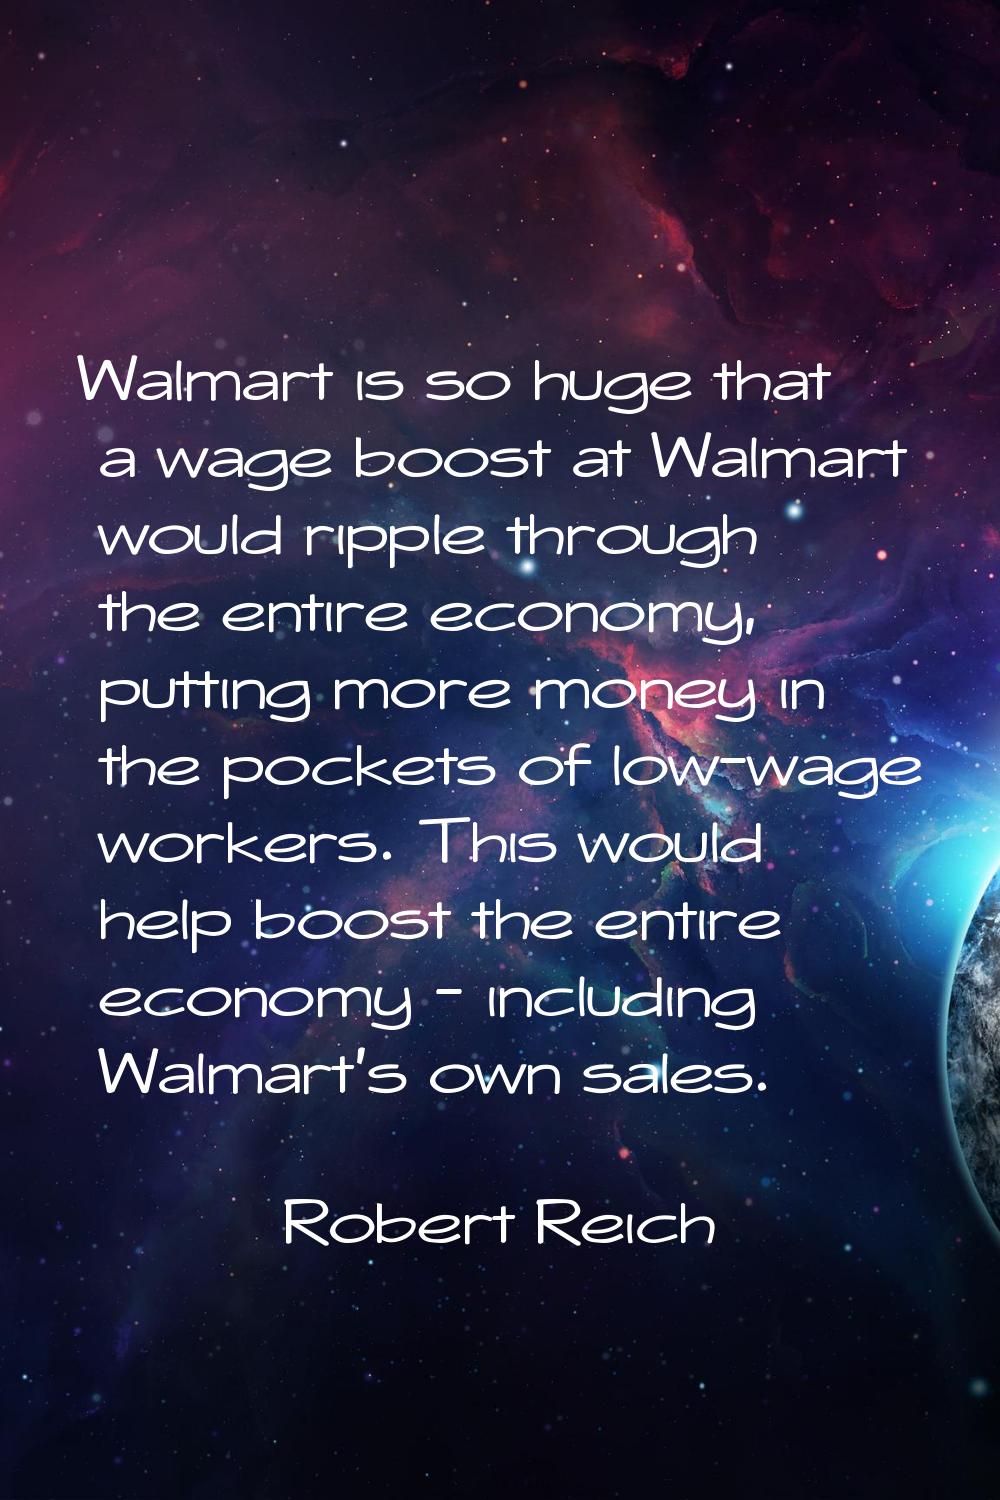 Walmart is so huge that a wage boost at Walmart would ripple through the entire economy, putting mo